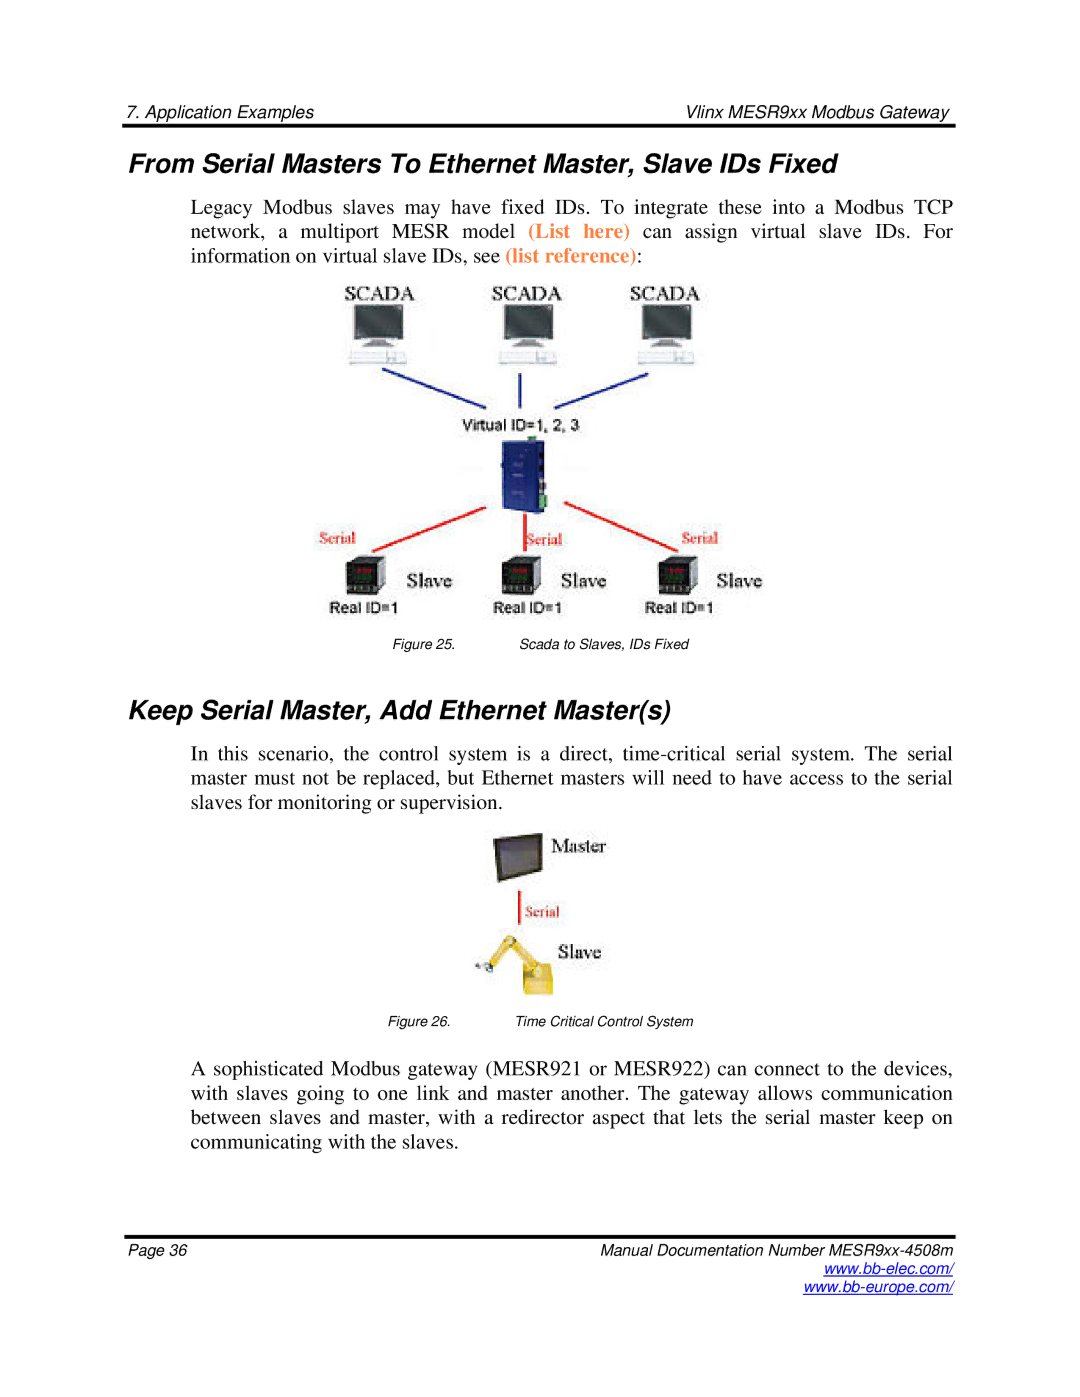 B&B Electronics MESR9xx From Serial Masters To Ethernet Master, Slave IDs Fixed, Keep Serial Master, Add Ethernet Masters 